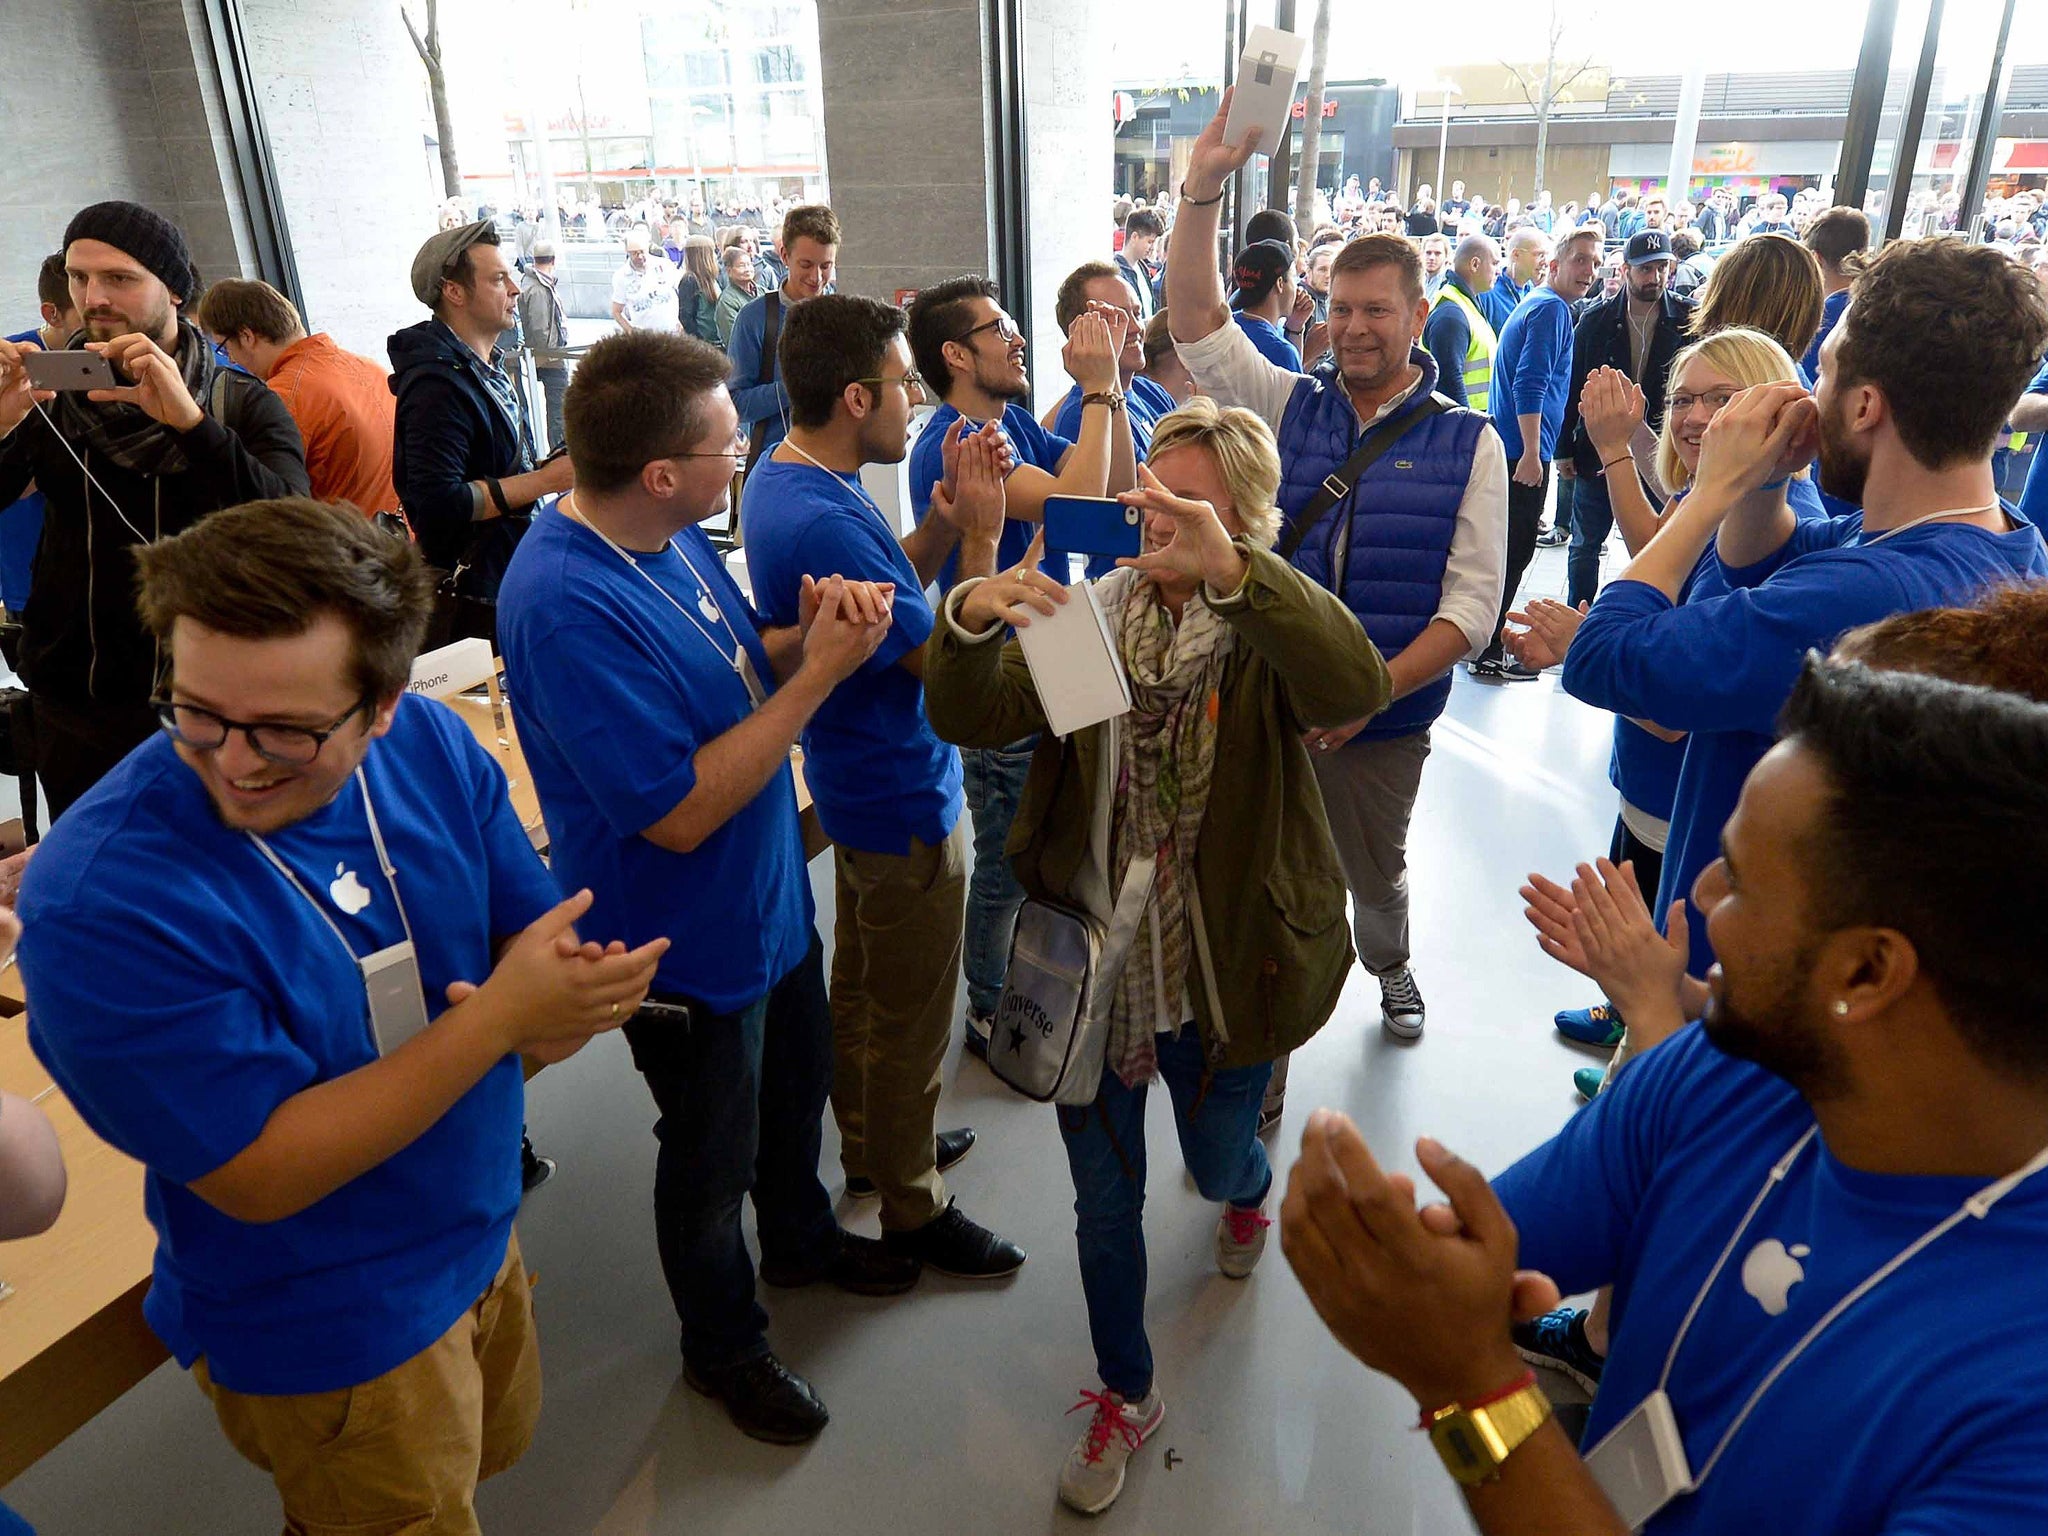 Apple employees greet costumers on the opening of an Apple Store in Hanover, central Germany on September 27, 2014